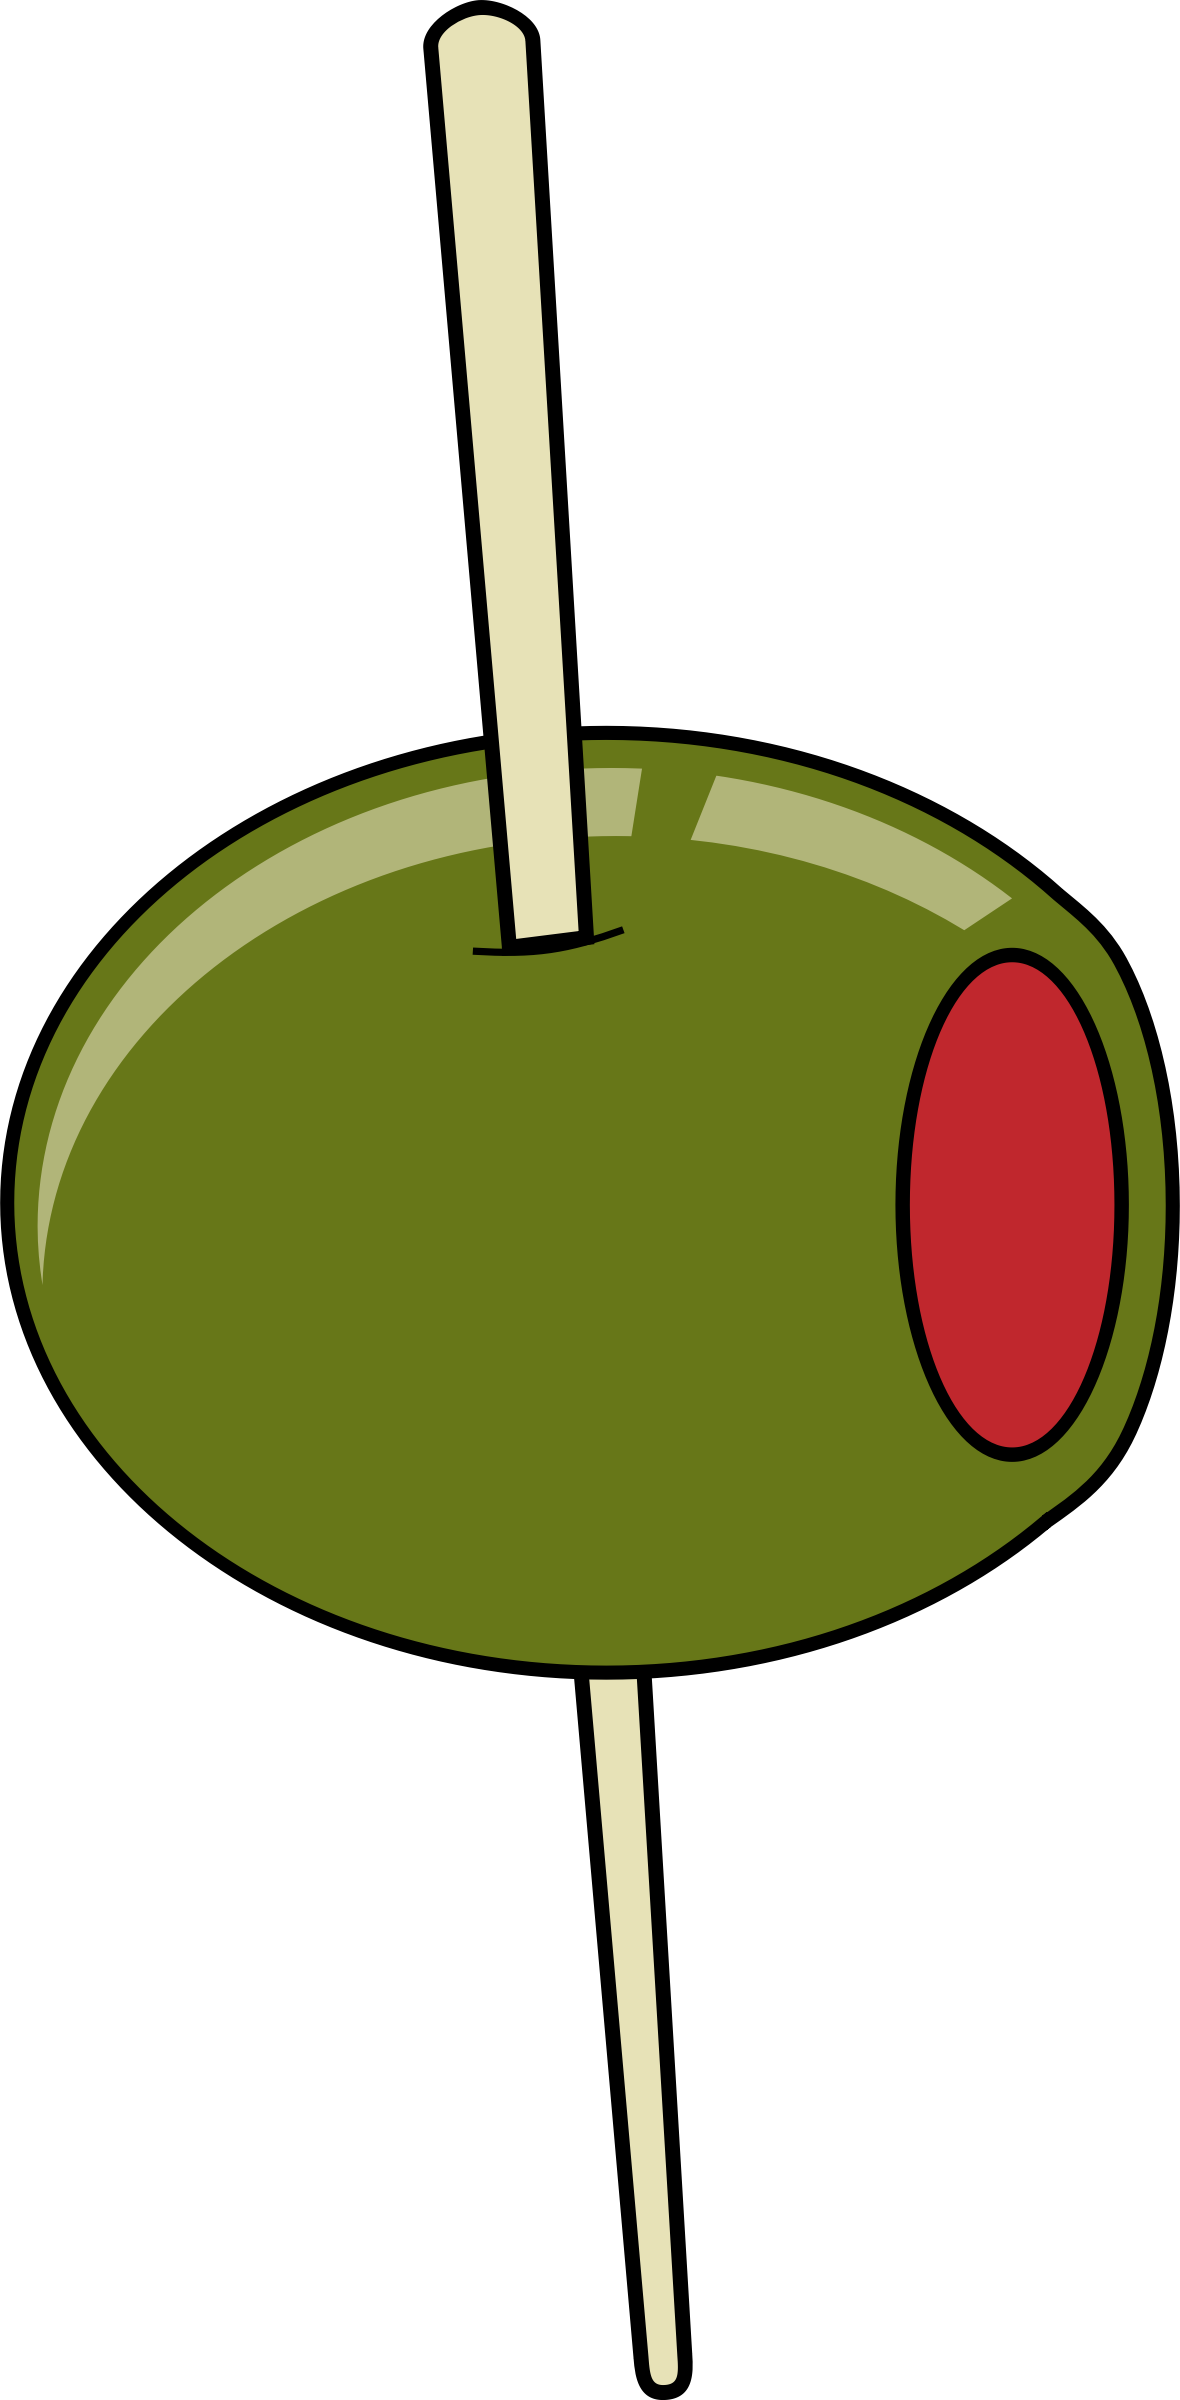 Green olive clipart people - ClipartFest